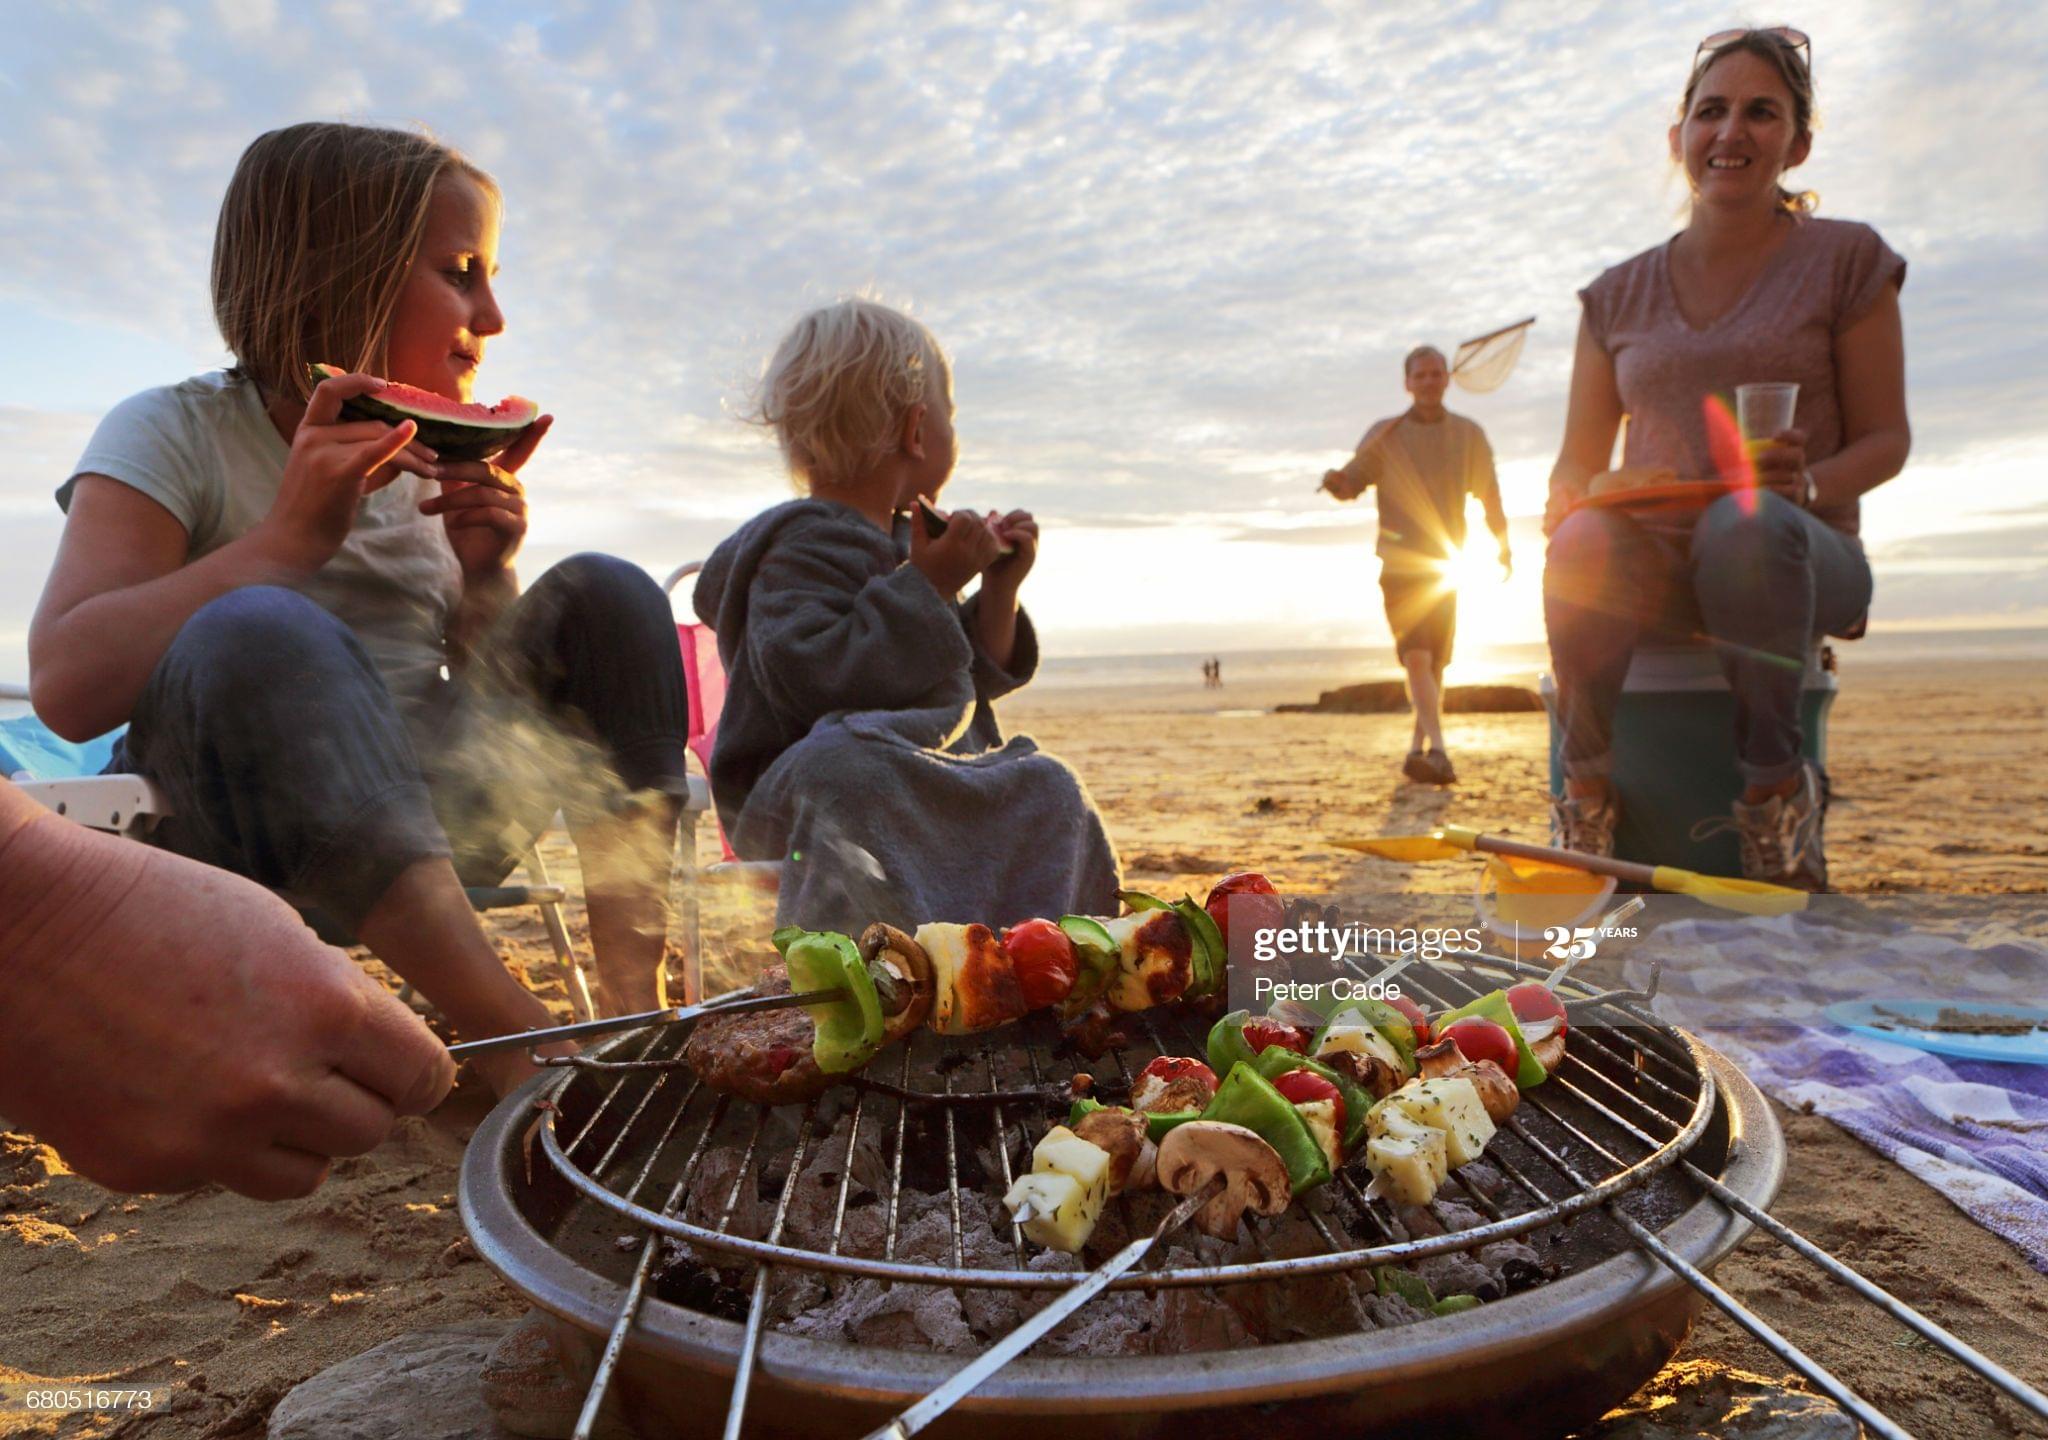 Enjoy a Barbeque Session with Family